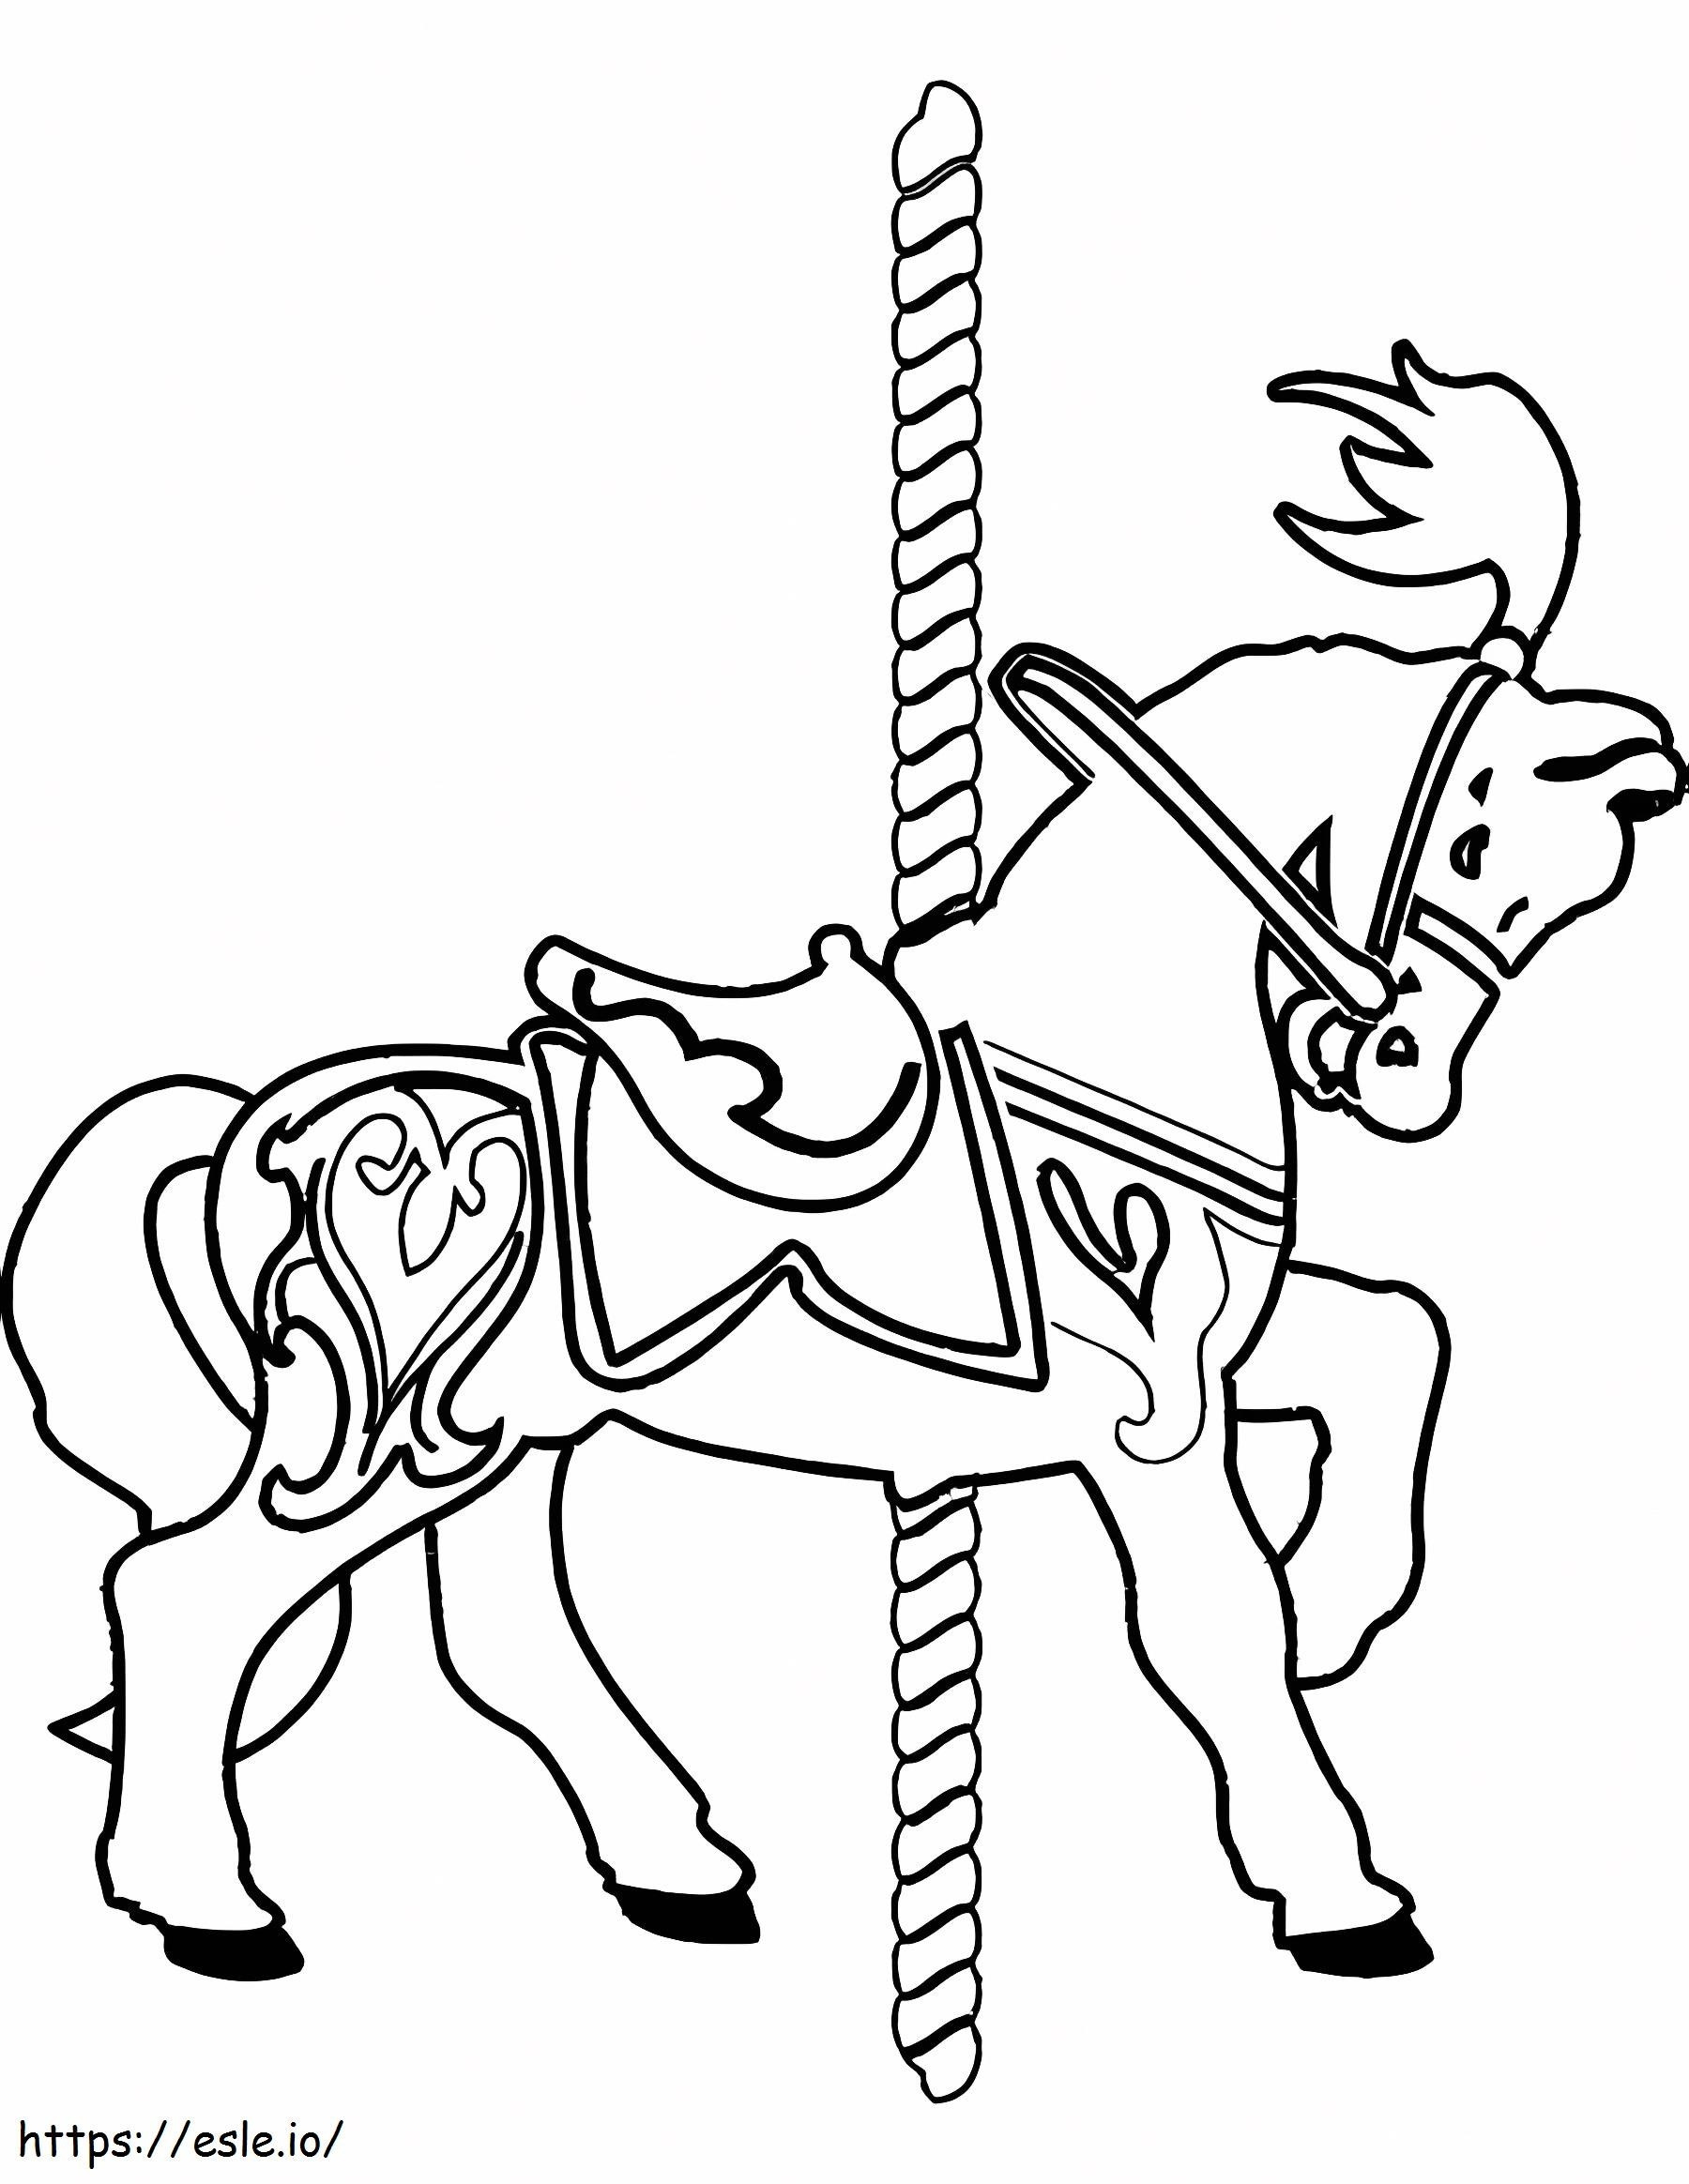 Carousel Horse For Children coloring page